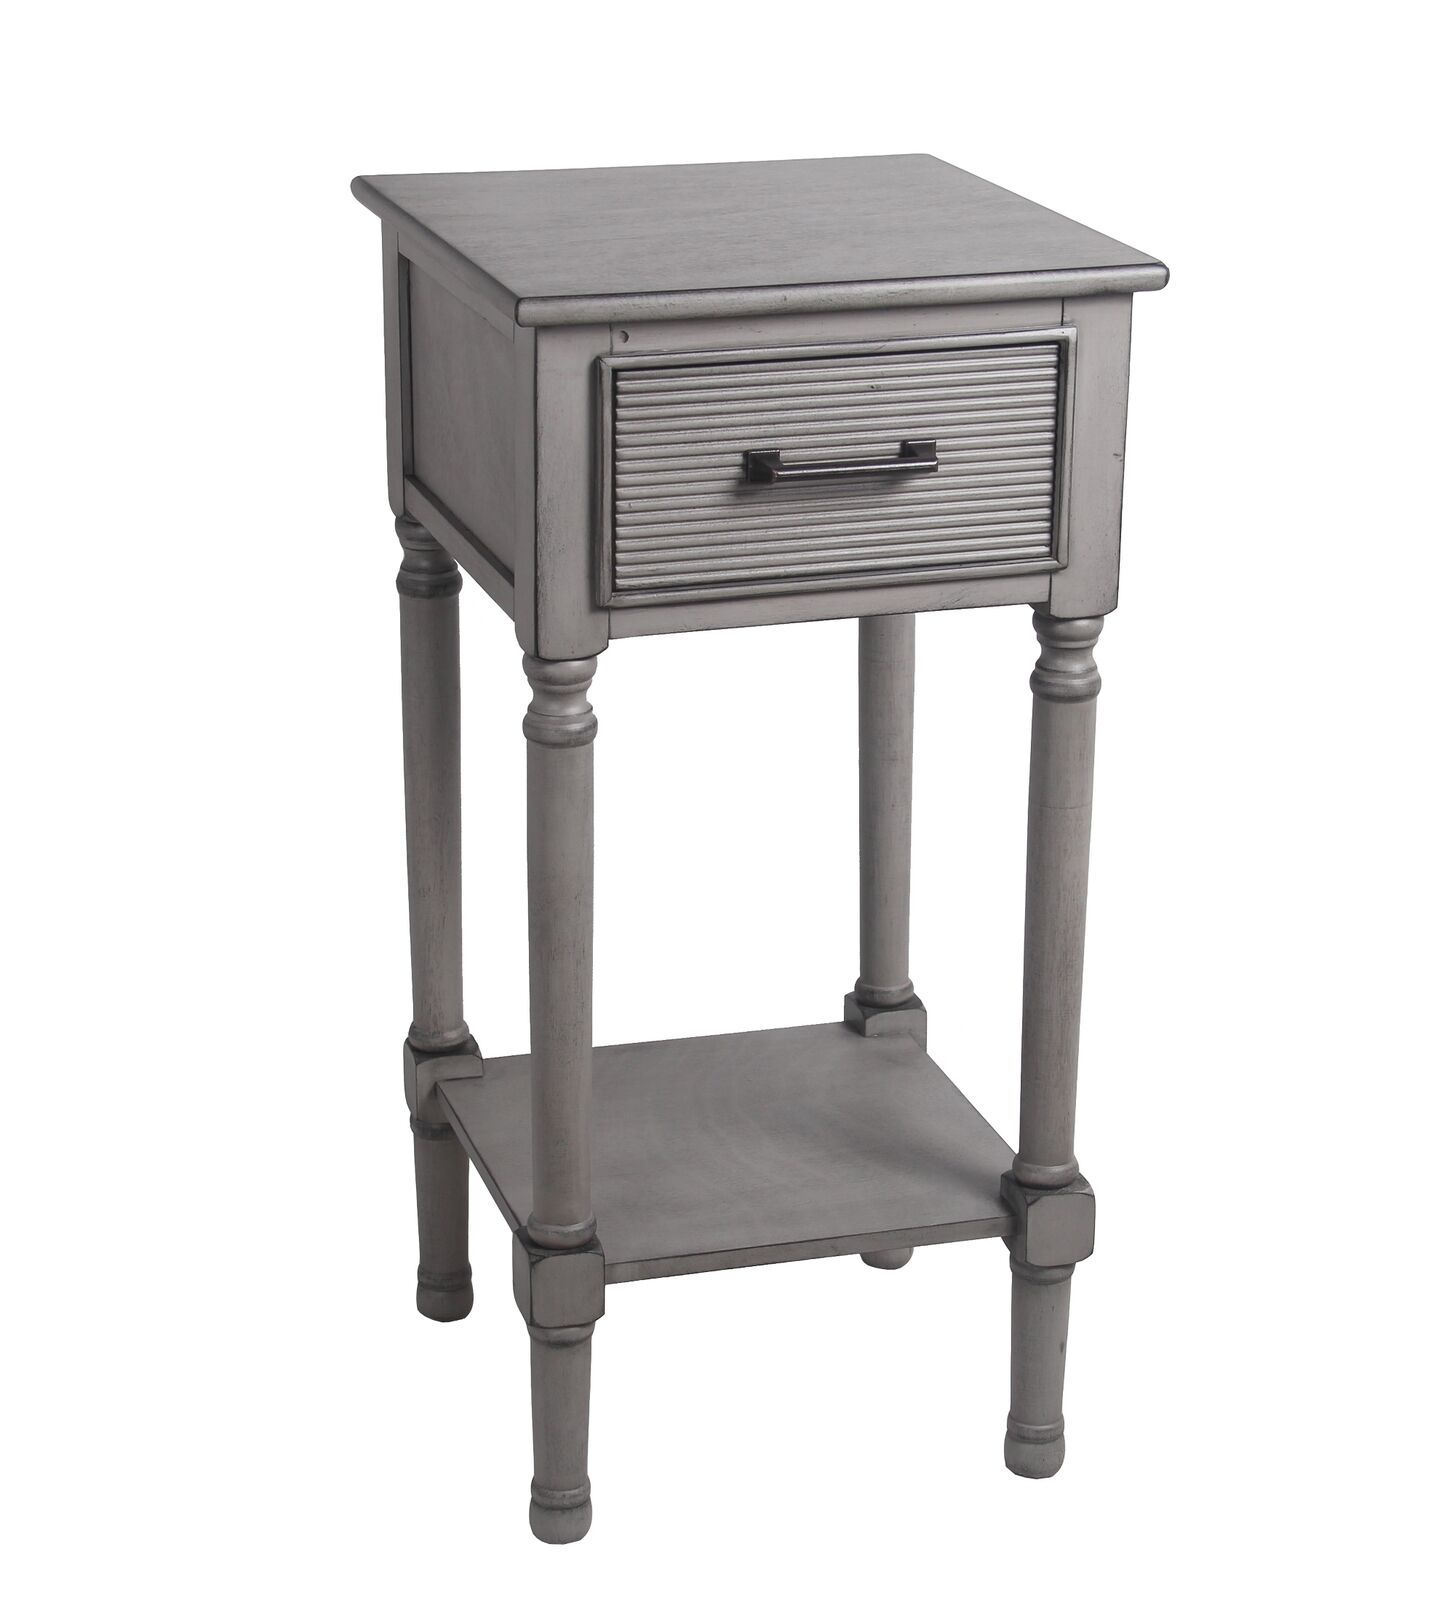 privilege transitional wood accent table with gray finish small red side pipe desk wedding reception decorations concrete top dining room tall nautical lamp living armchair pier